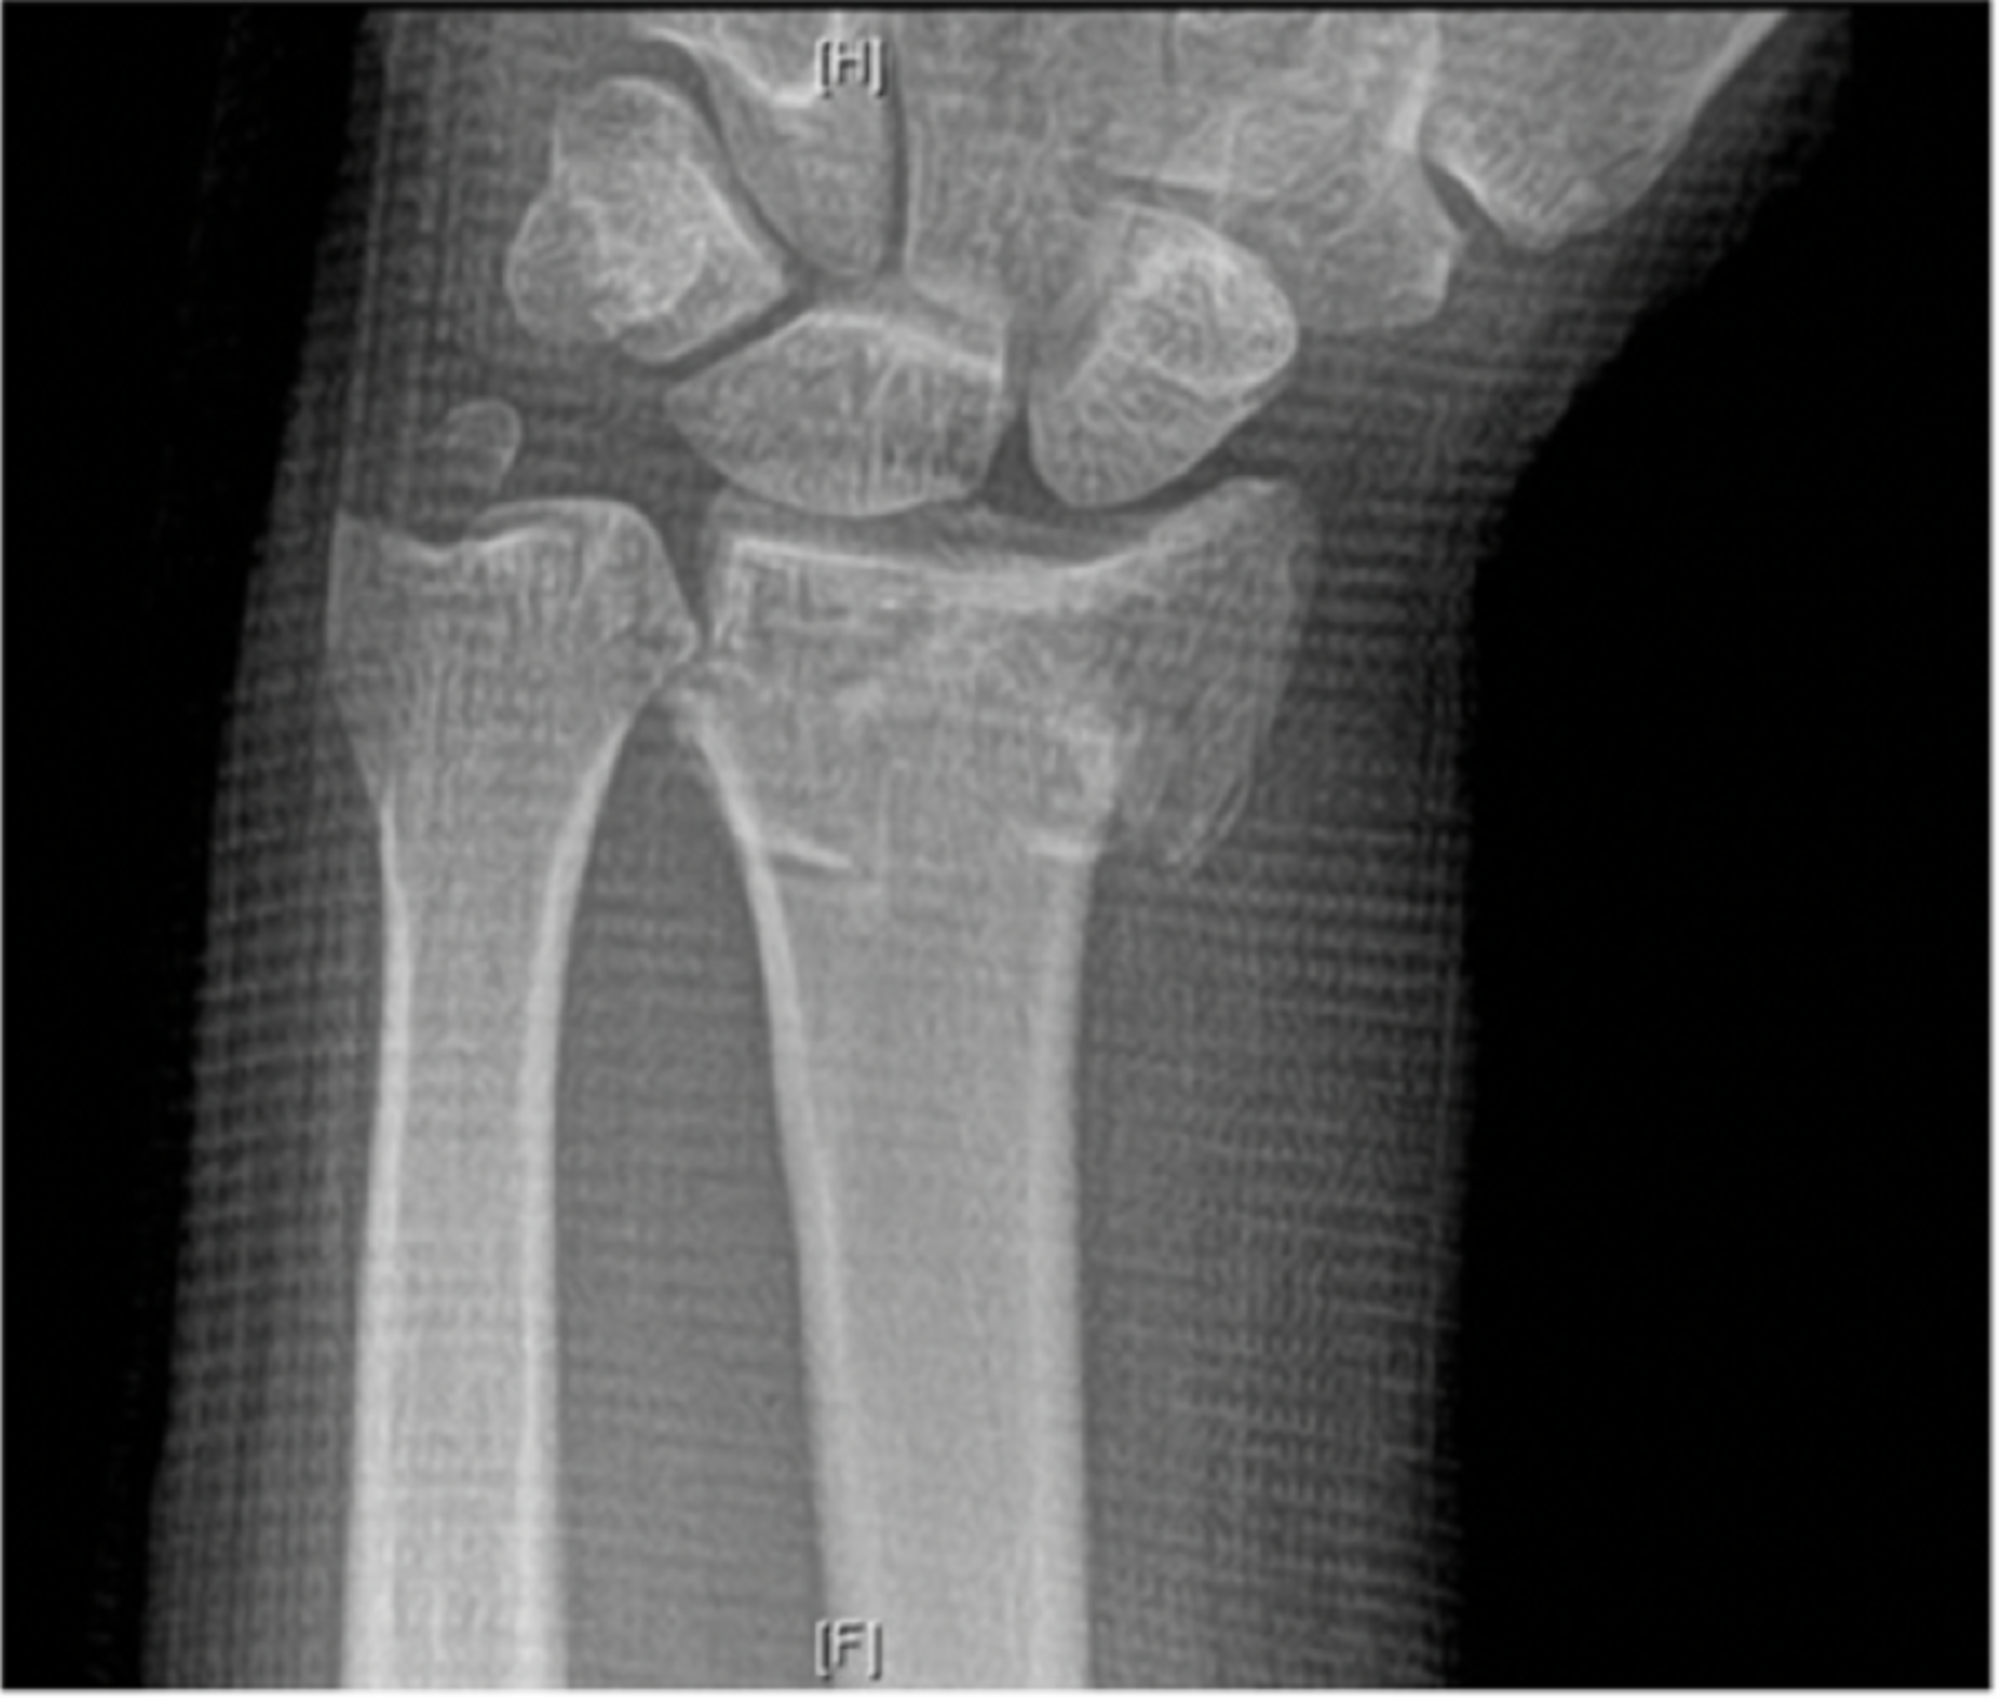 icd 10 code for right distal radius fracture